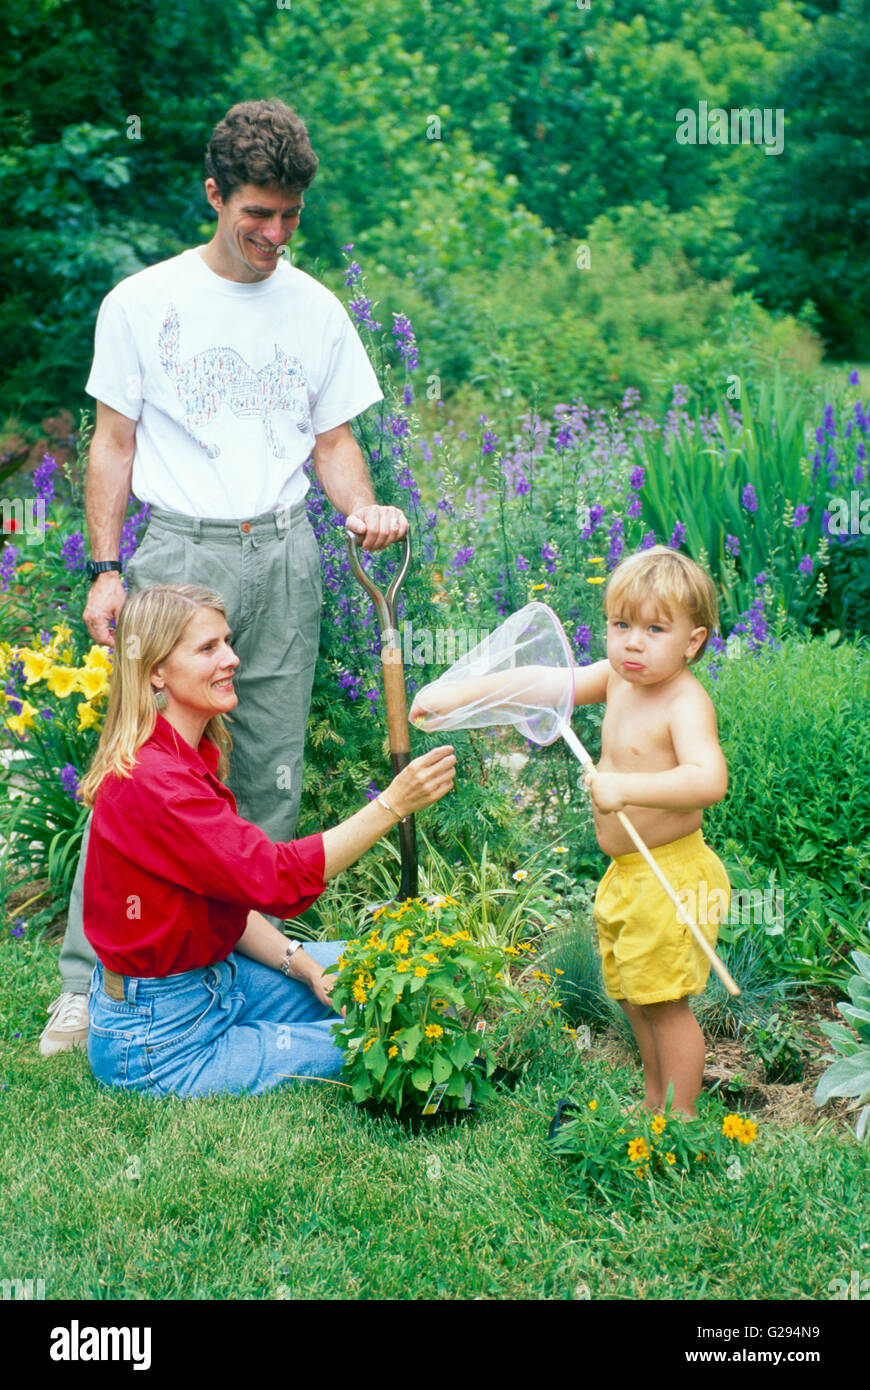 Family and young boy in garden with butterfly net makes a face at camera, Missouri, USA Stock Photo